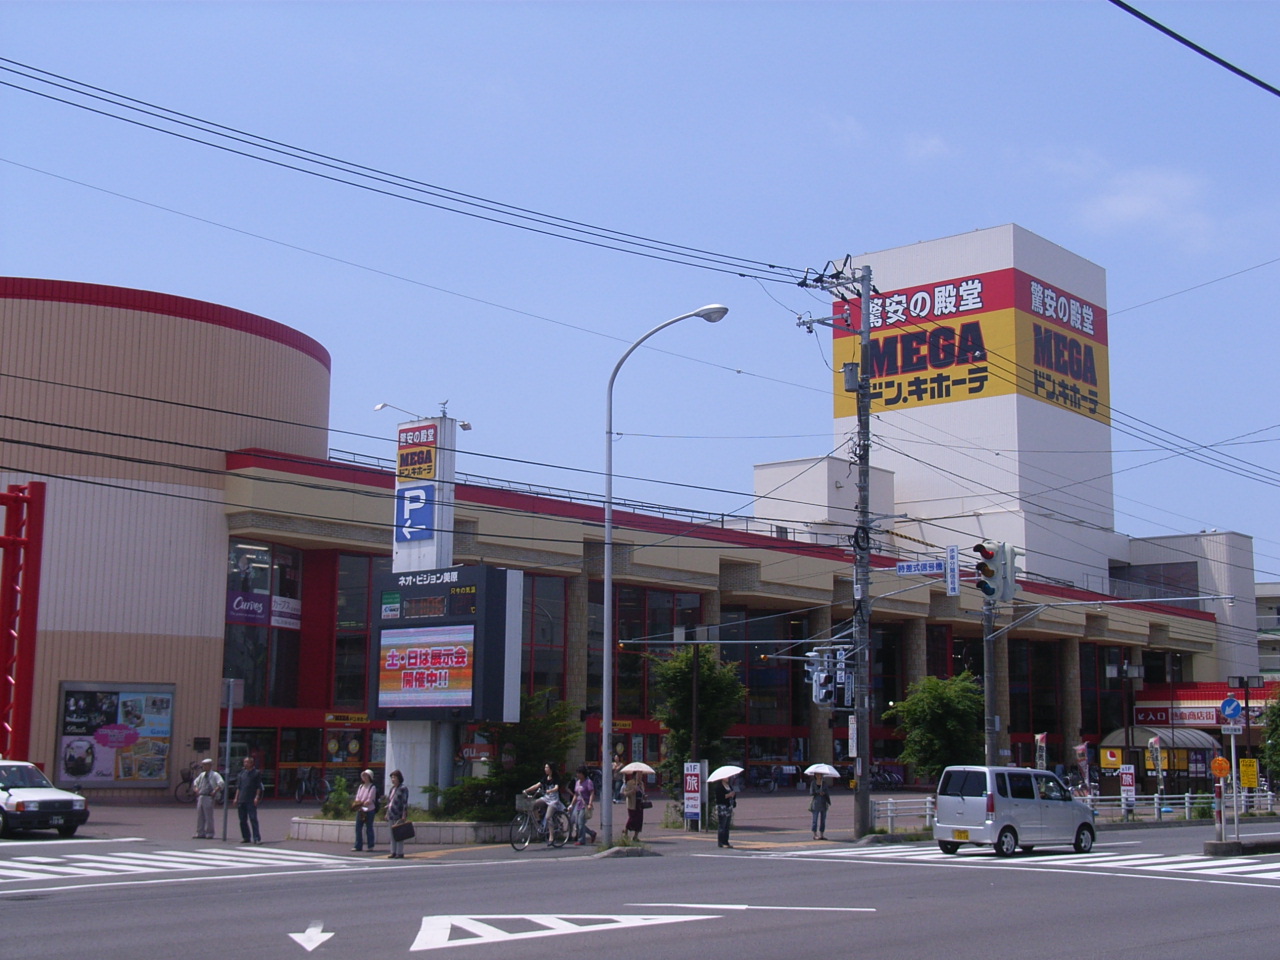 Shopping centre. MEGA Don ・ 1675m until Quijote Hakodate store (shopping center)